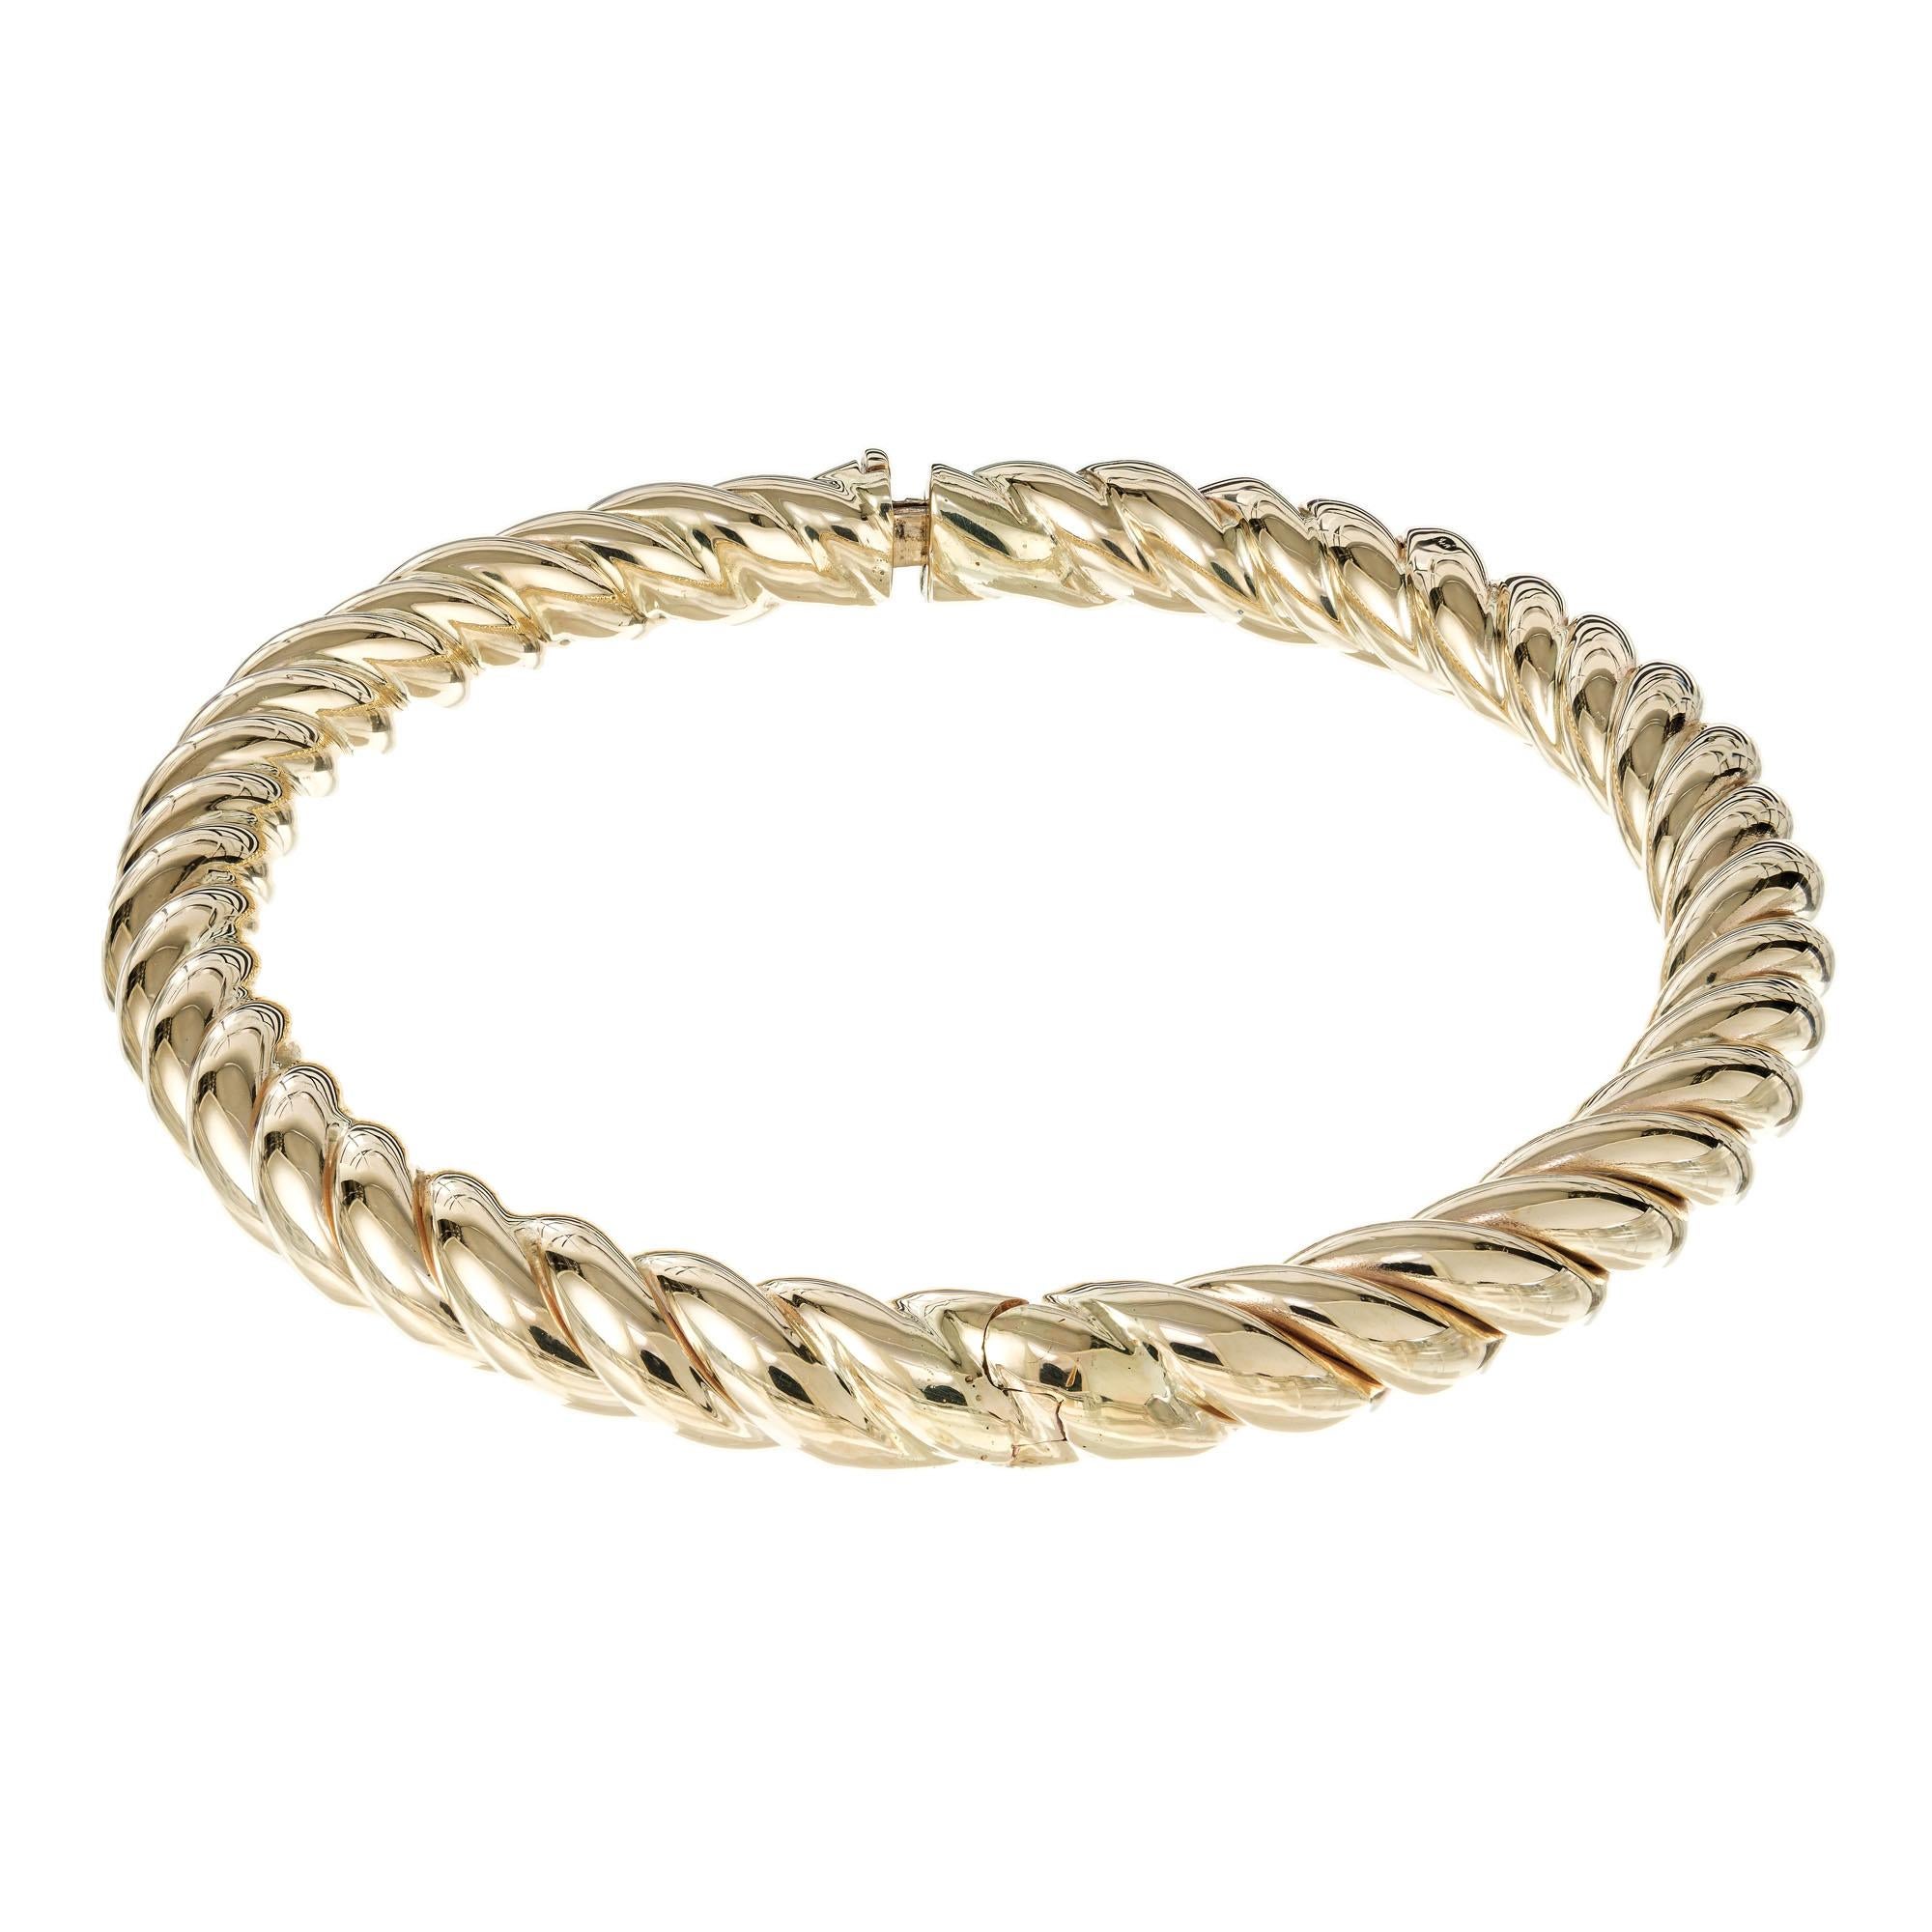 1970's Twisted spiral design Italian yellow gold bangle bracelet. Hinge and clasp are on the right. 

14k yellow gold 
Stamped: 14k
19.4 grams
Width: 6.8mm
Thickness/ Depth: 6.8mm
Inside dimensions: 6.8mm
Inside dimensions: 2.5 inches x 2.25 Inches